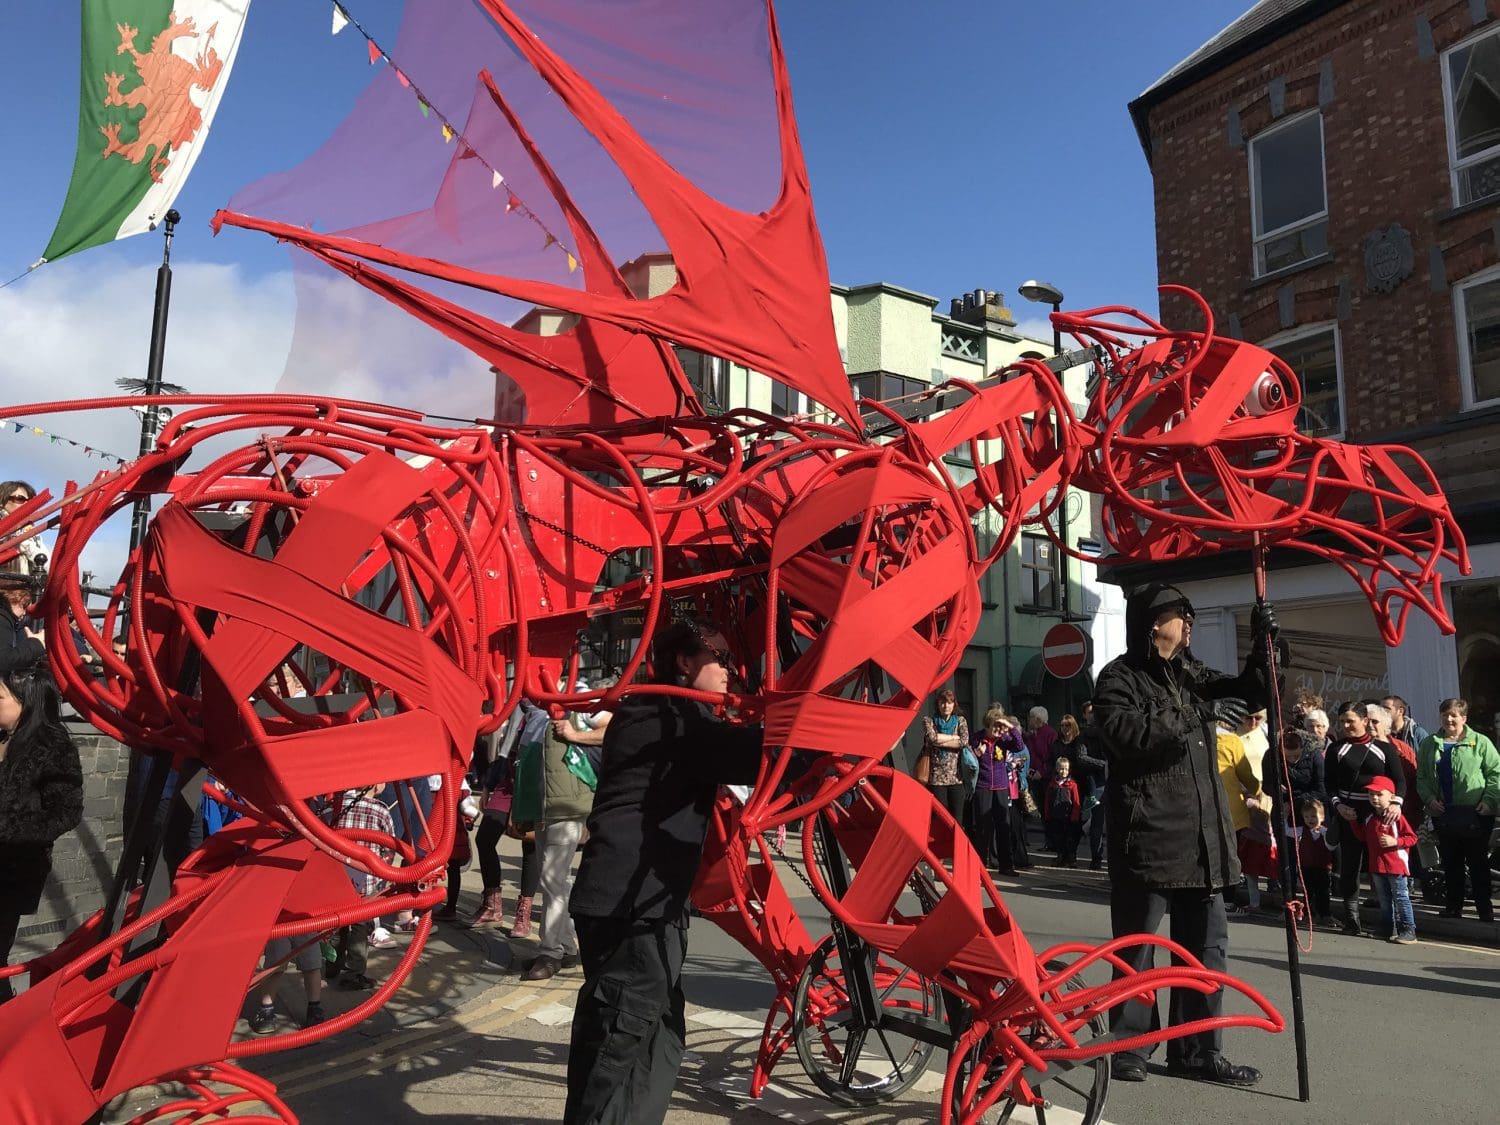 A red Welsh dragon representing Welsh independence YesCymru